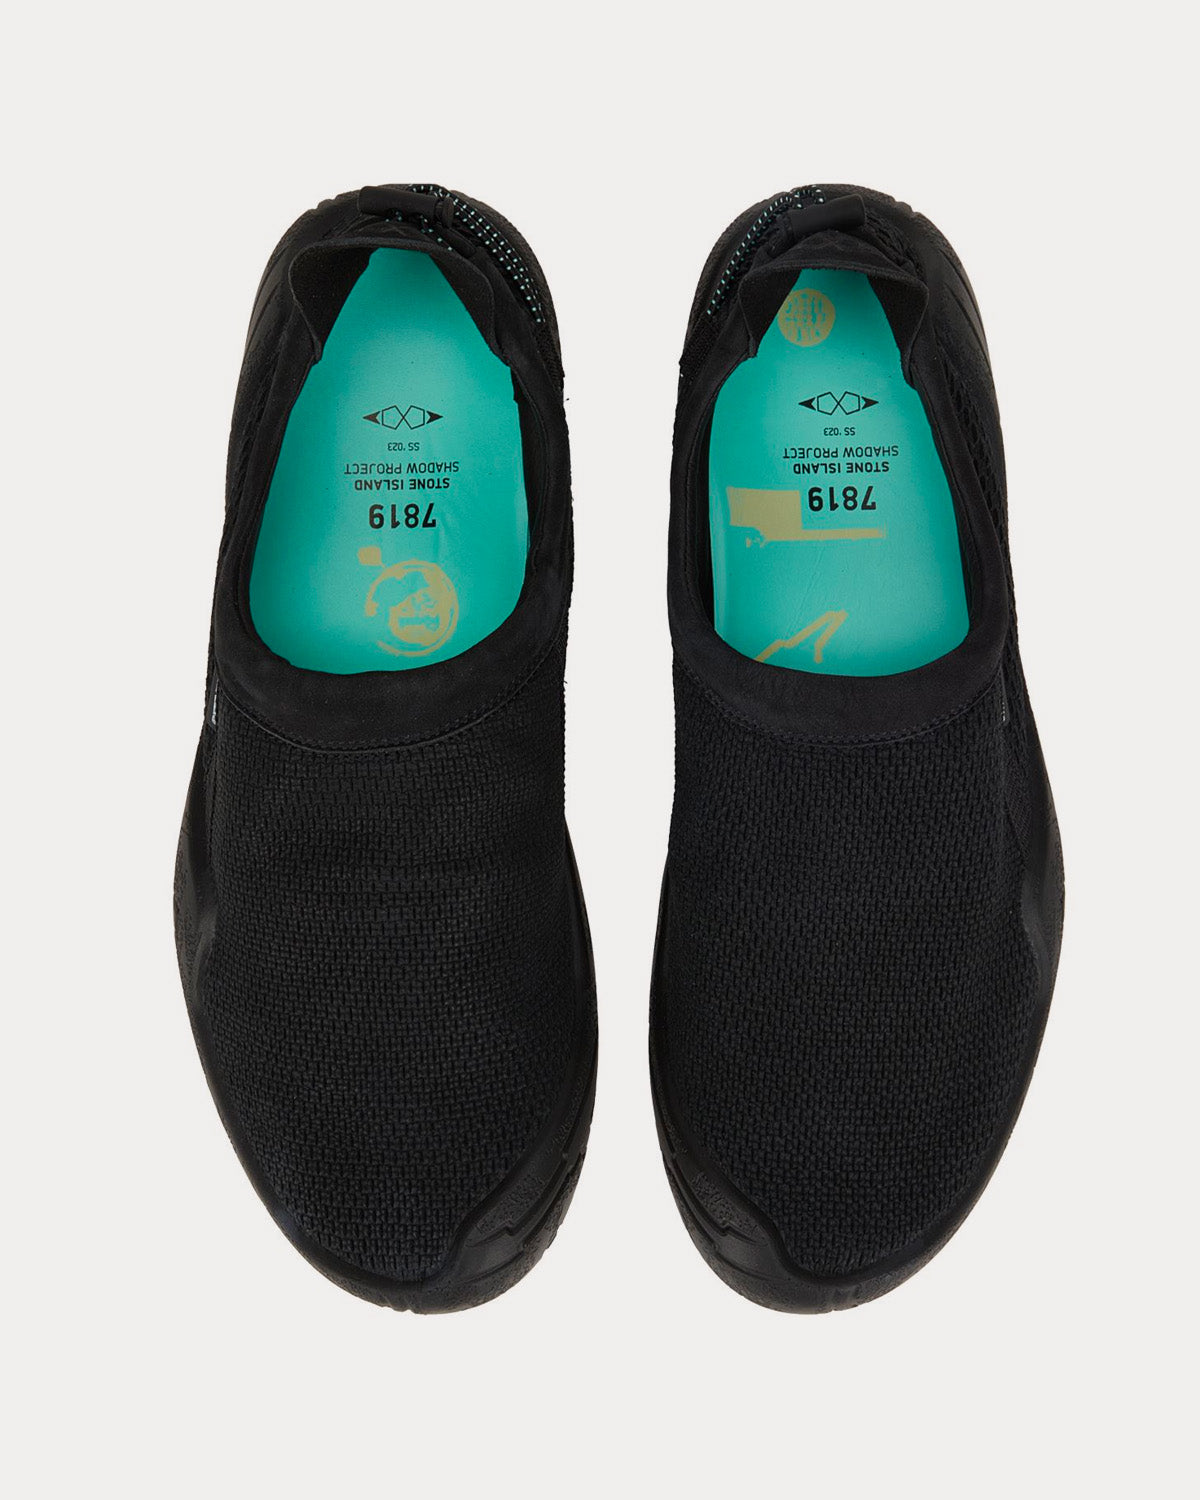 Stone Island Shadow Project - Shadow Moc Leather Mesh Effect Black Slip On Sneakers